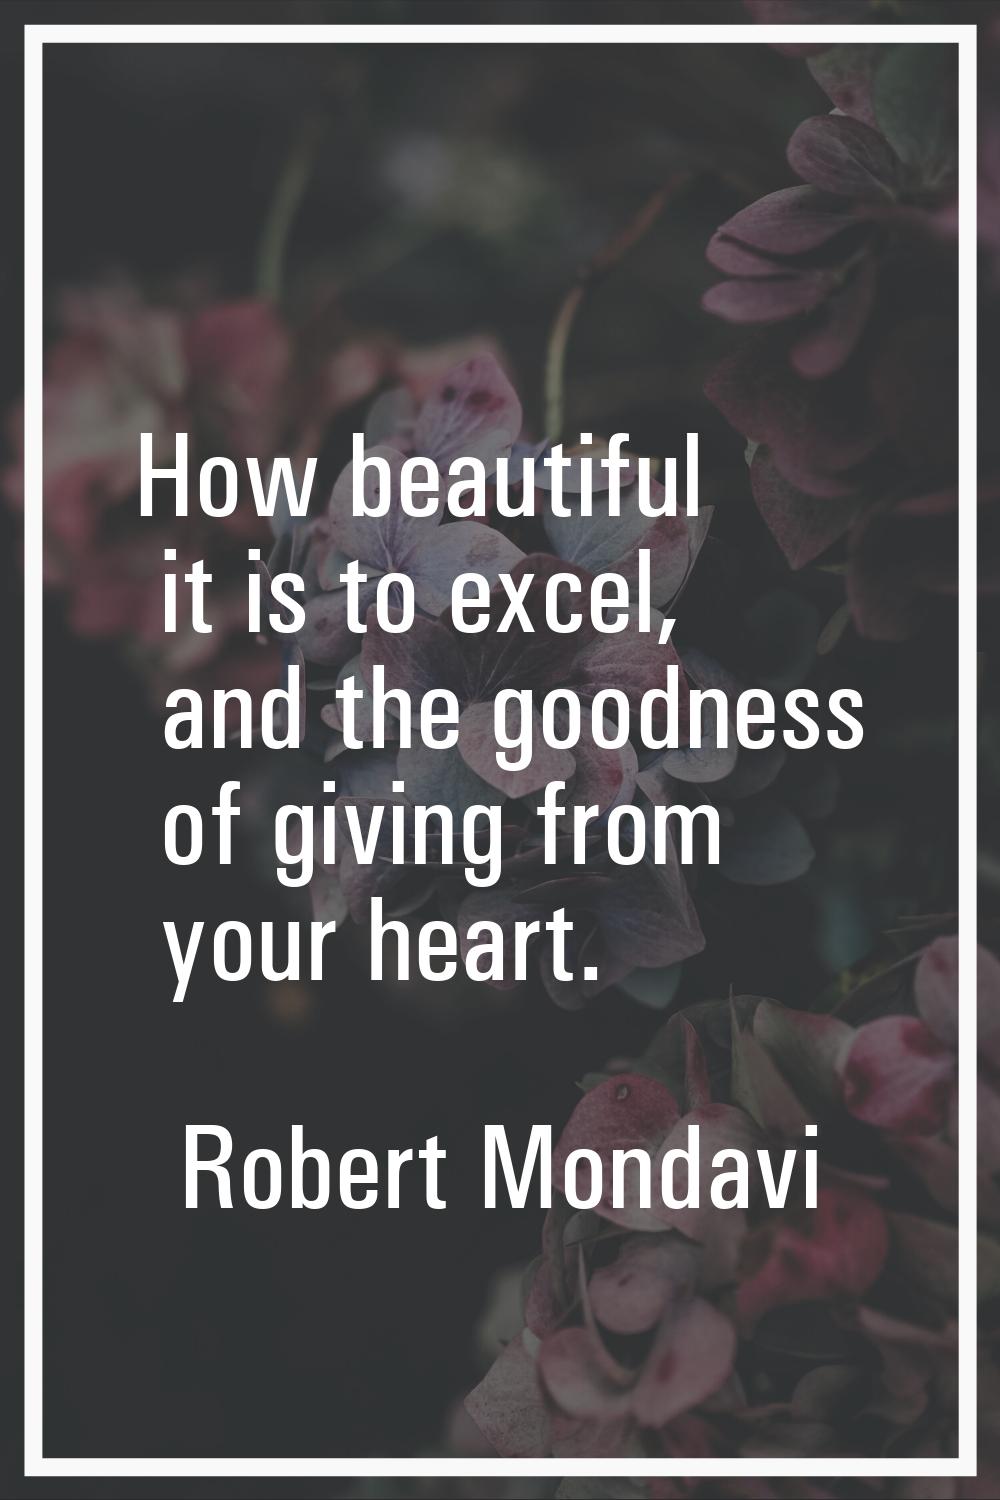 How beautiful it is to excel, and the goodness of giving from your heart.